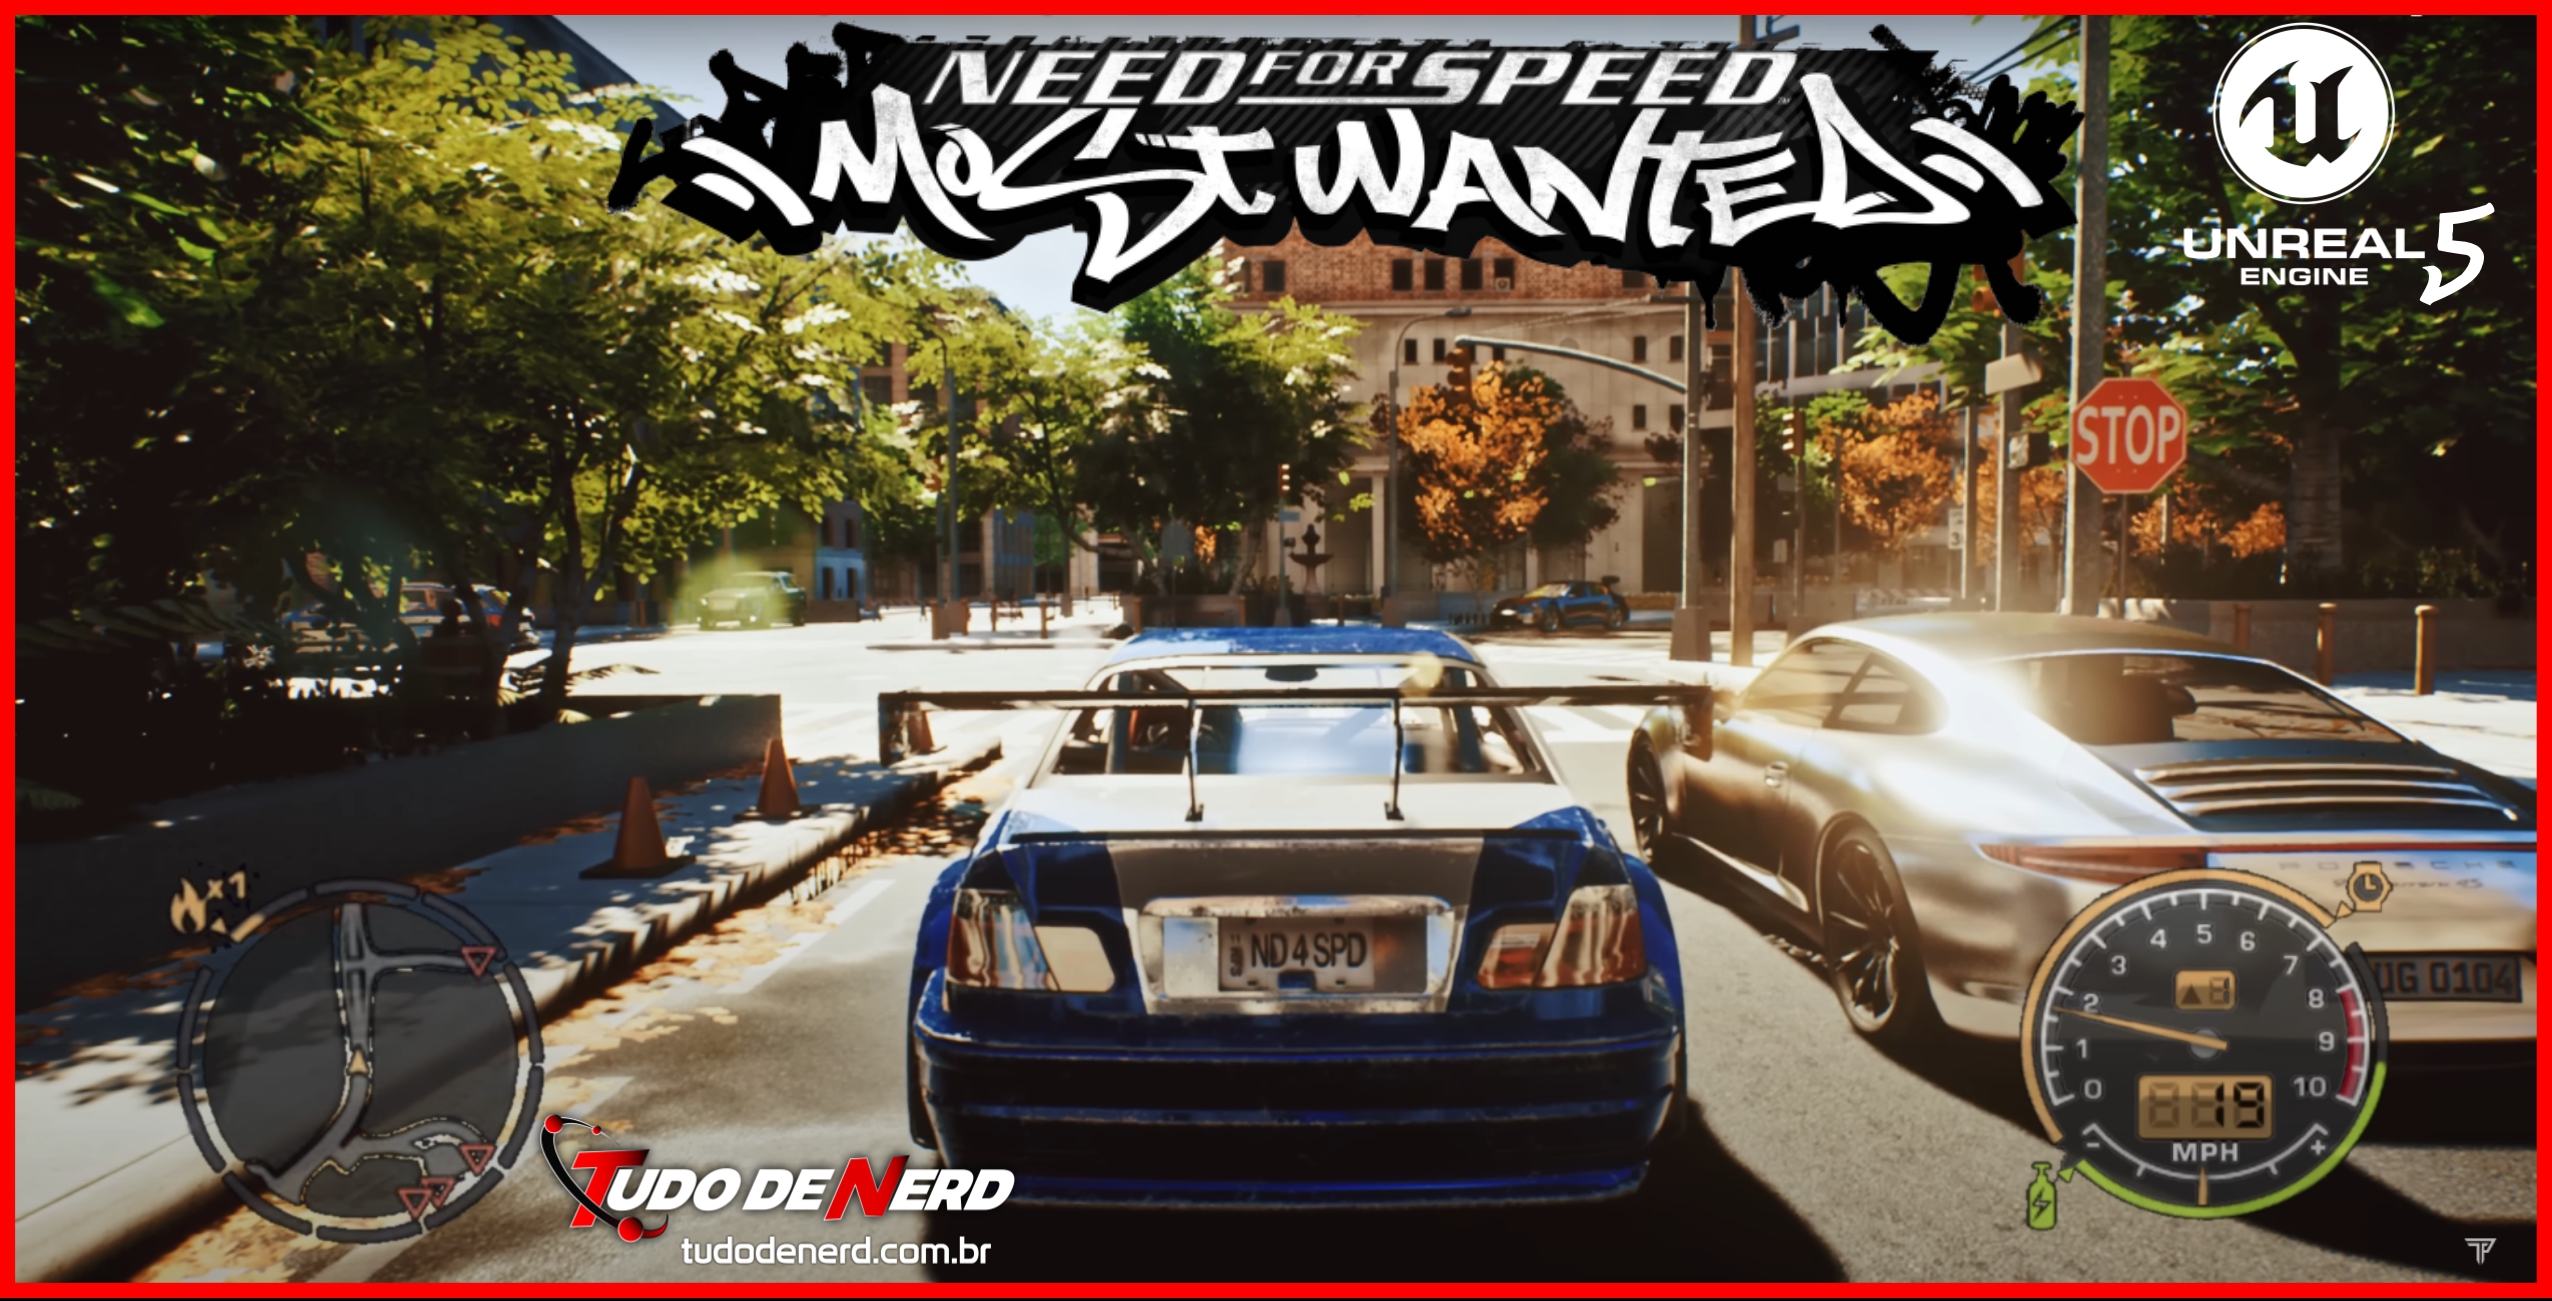 Need for Speed Most Wanted unreal engine 5